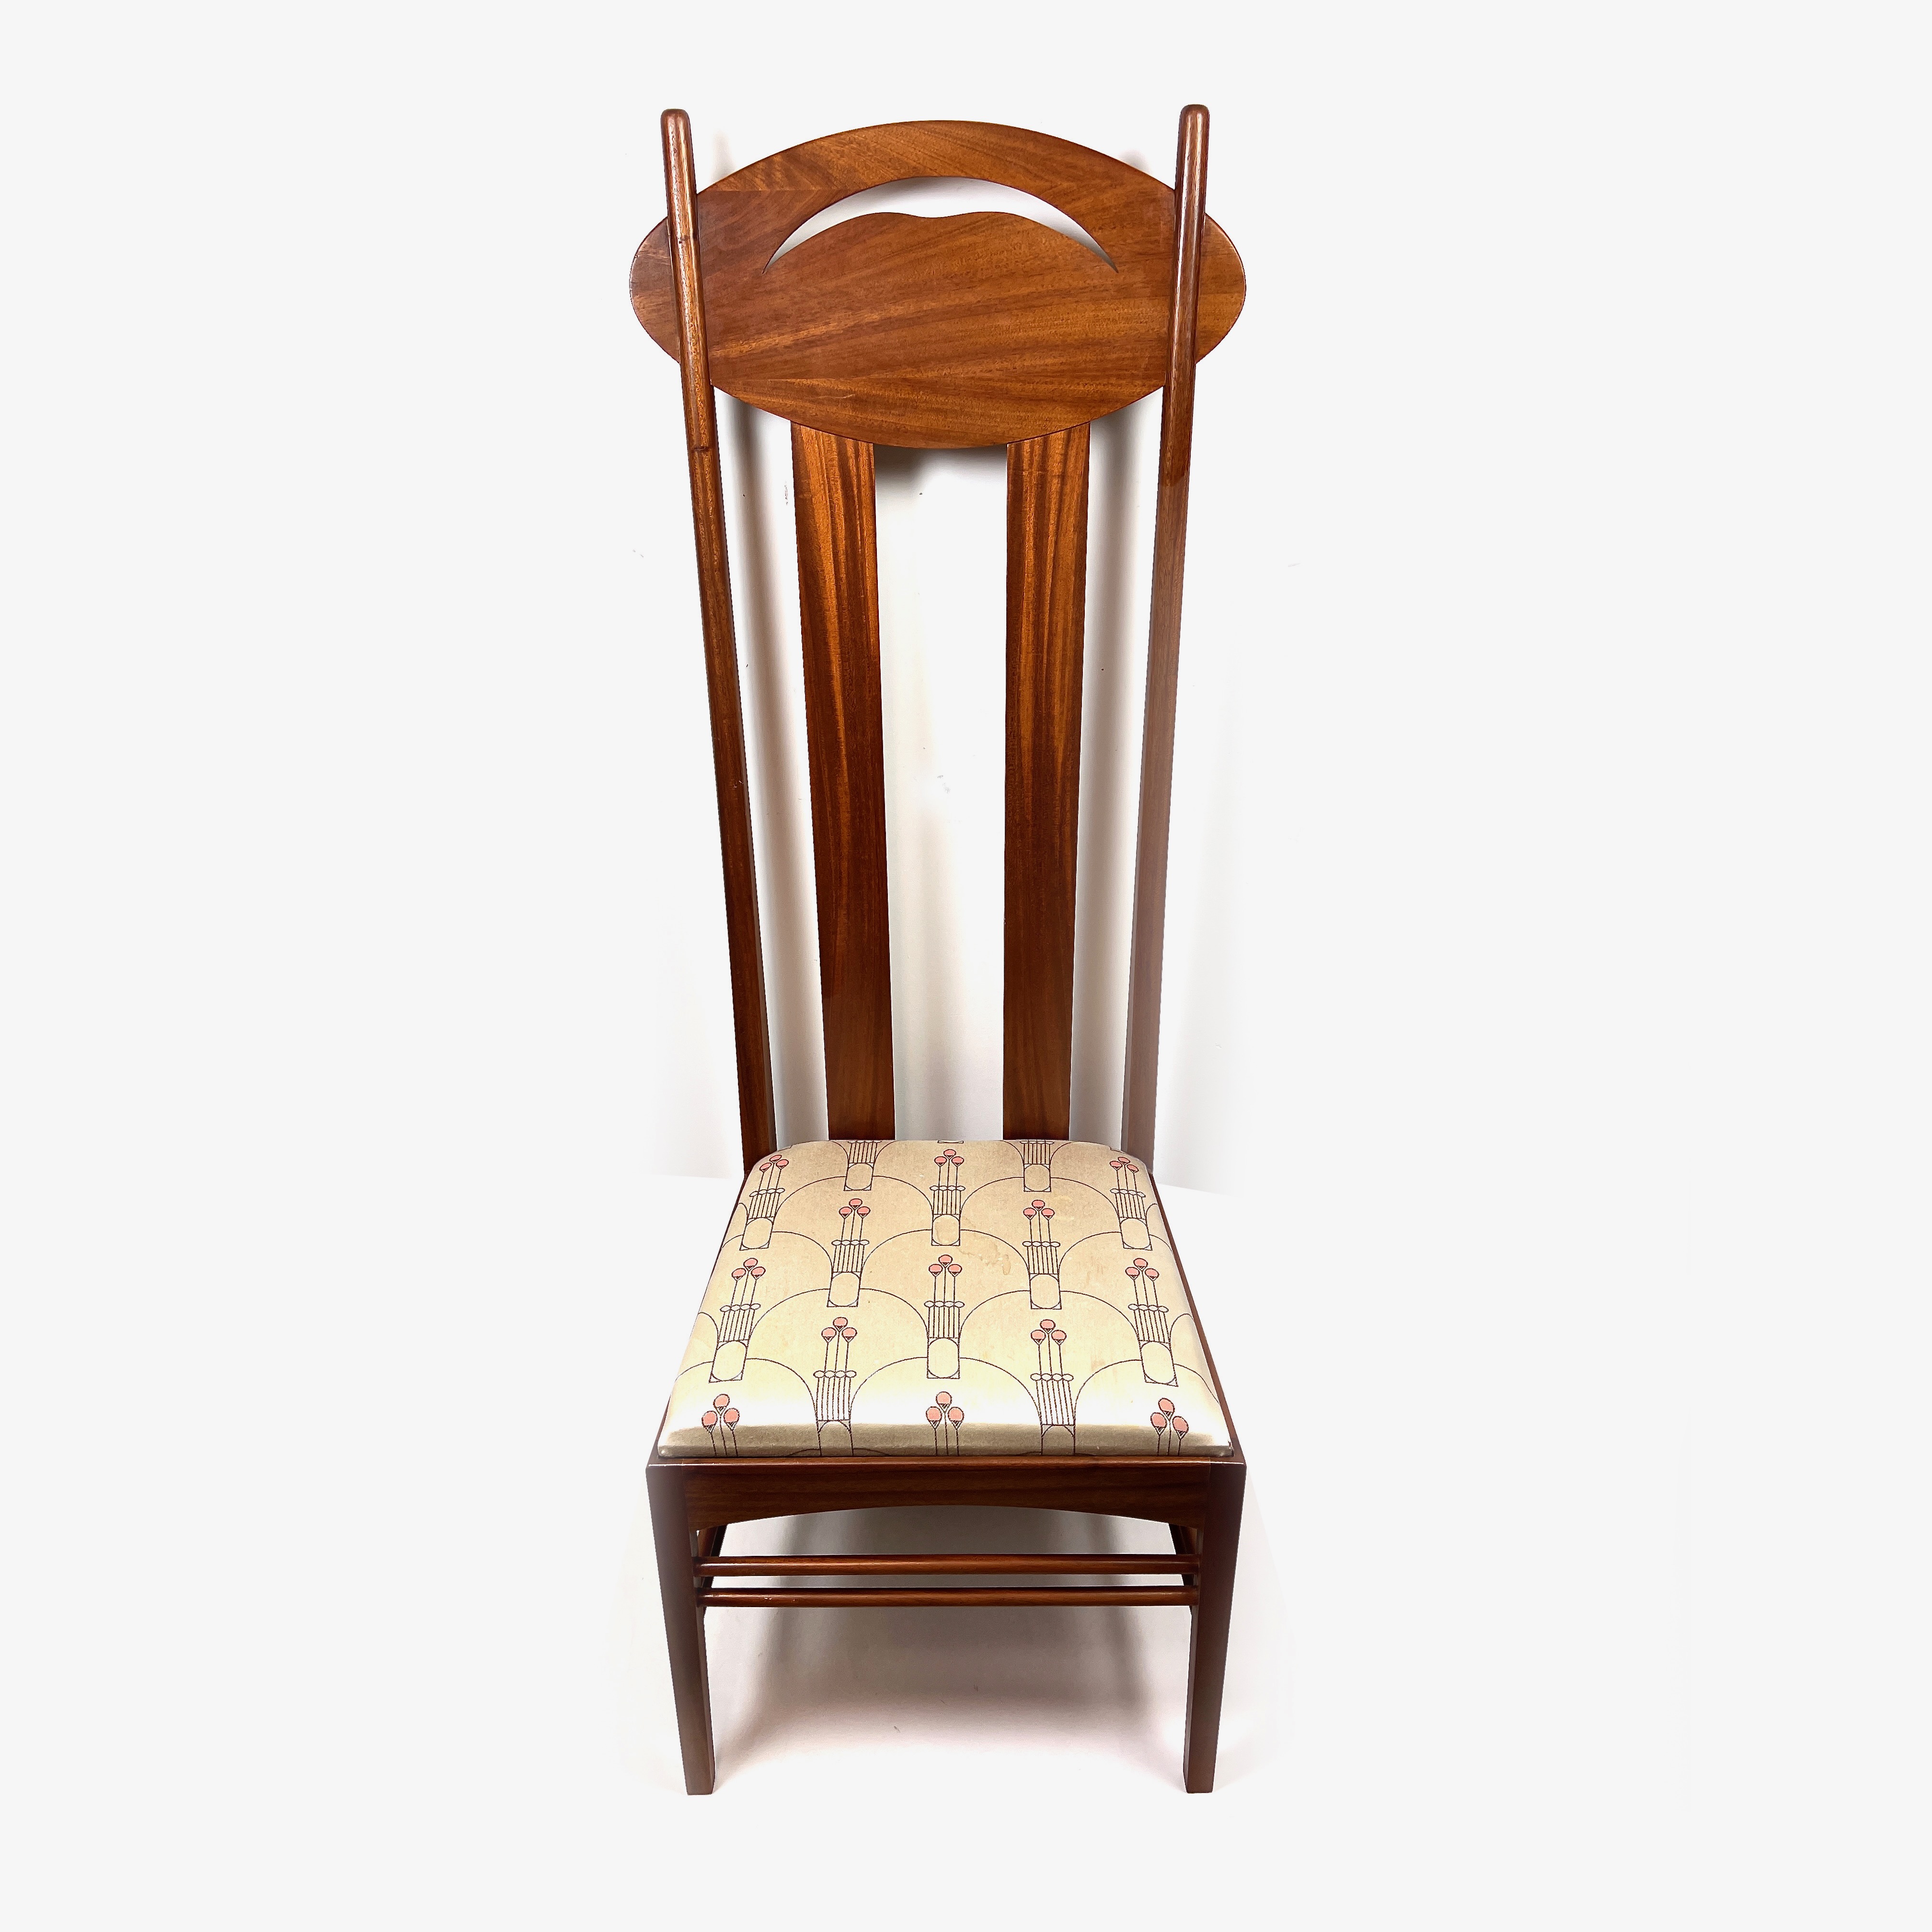 Two Charles Rennie Mackintosh style dining chairs, 21st century - Image 2 of 3